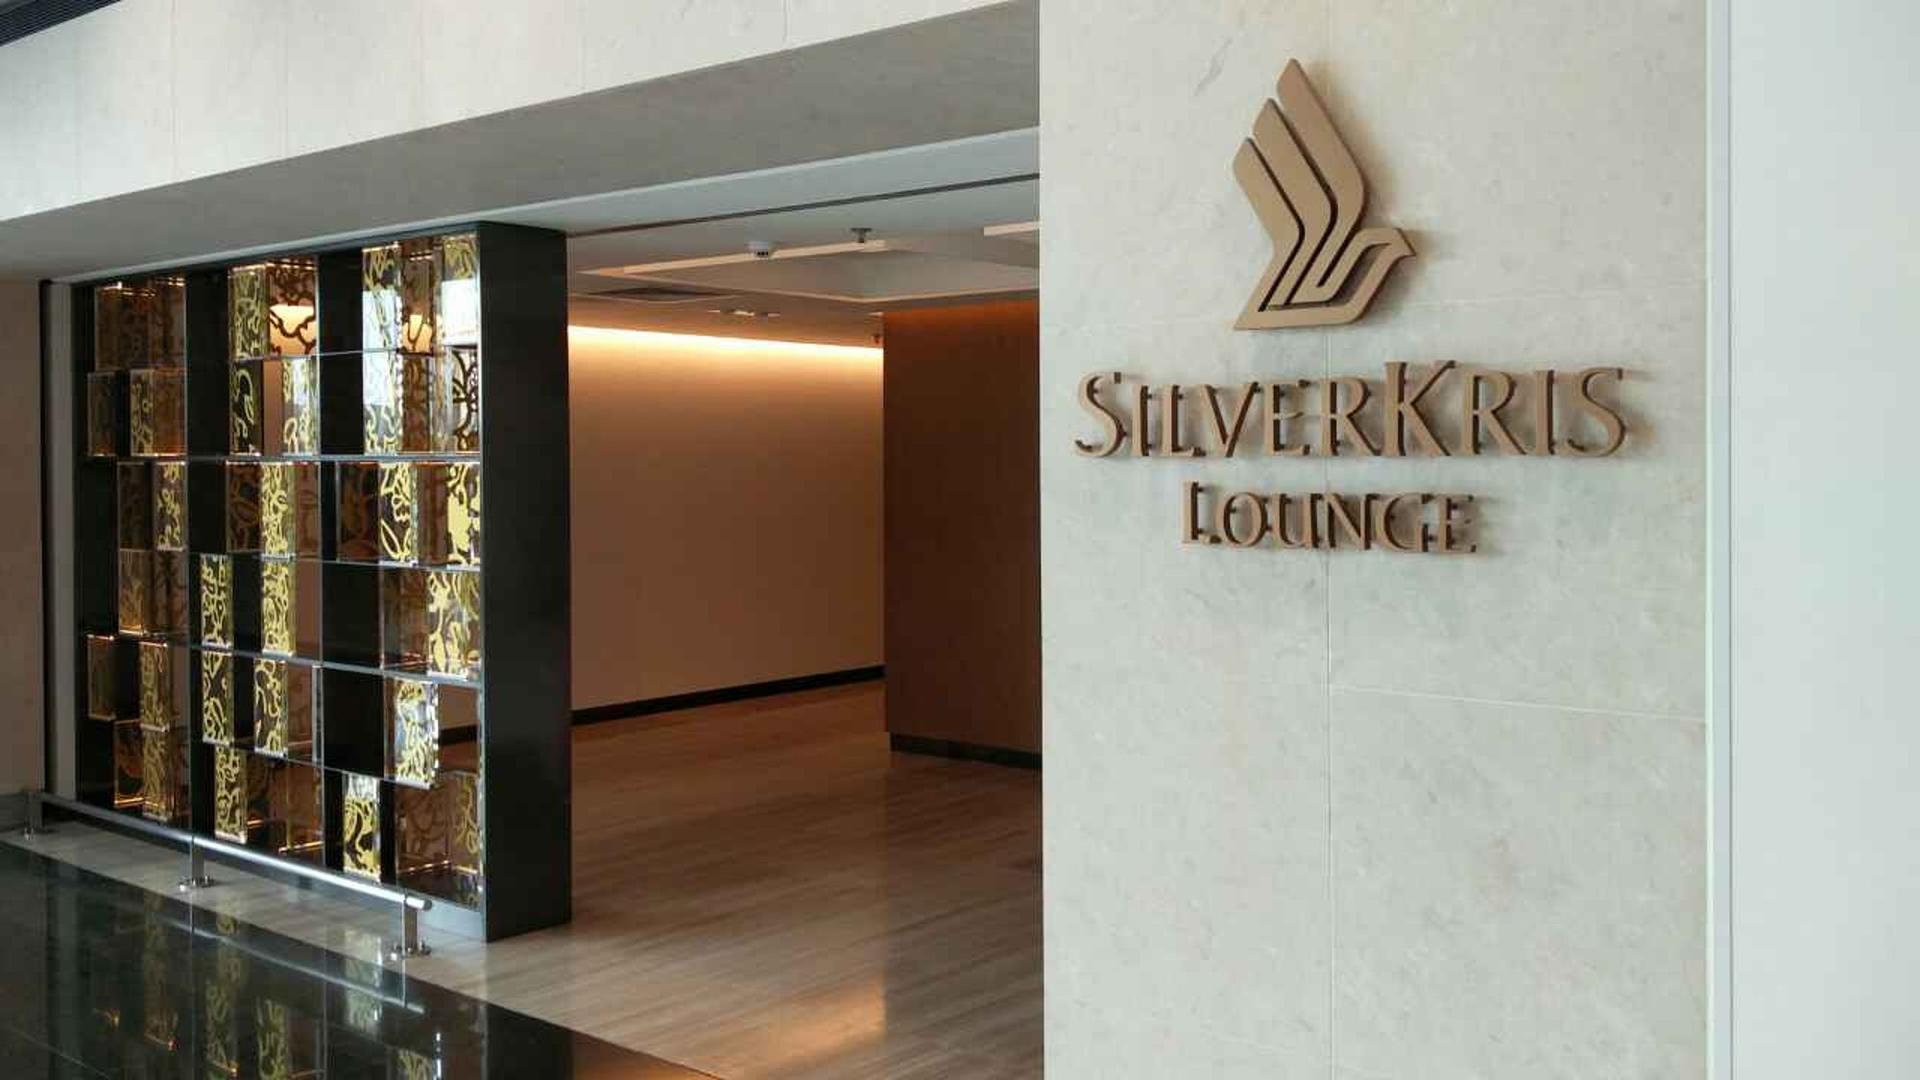 Singapore Airlines SilverKris Business Class Lounge image 48 of 68